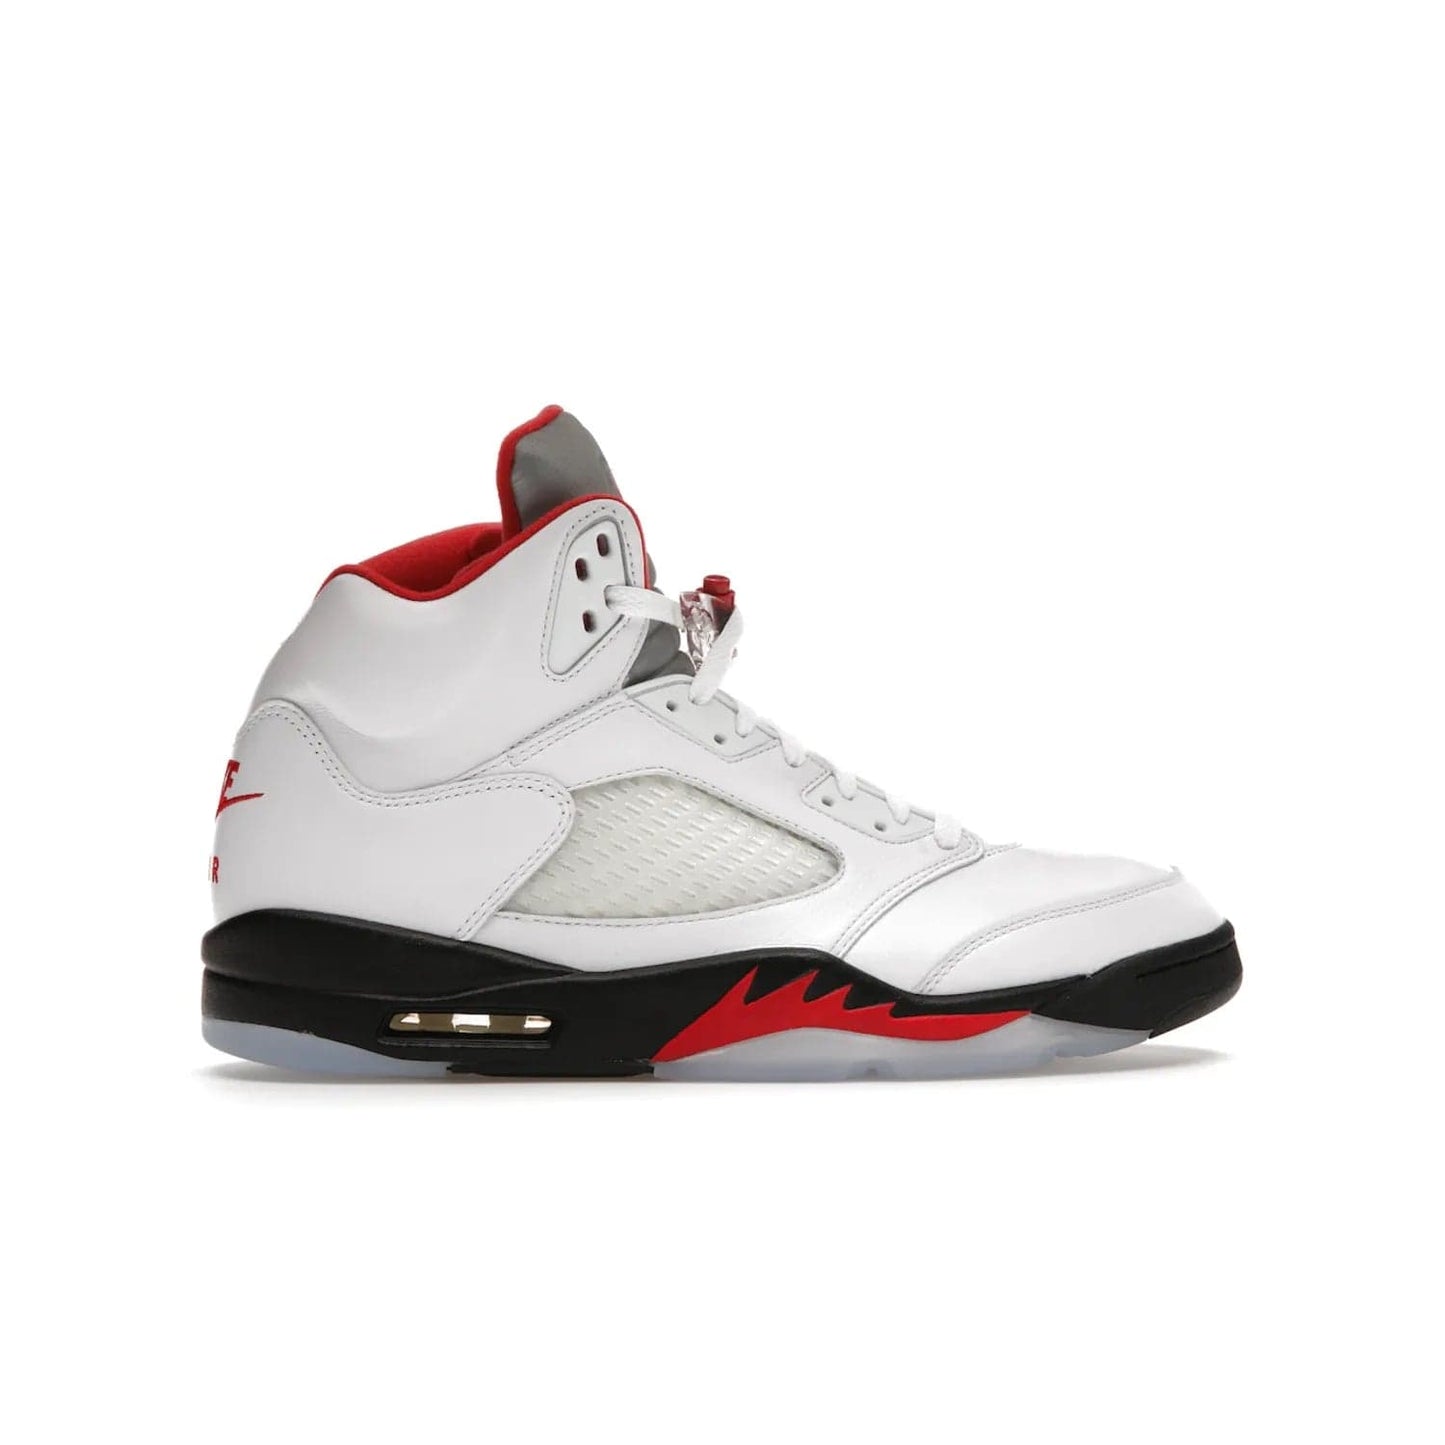 Jordan 5 Retro Fire Red Silver Tongue (2020) - Image 36 - Only at www.BallersClubKickz.com - Experience classic styling with the Jordan 5 Retro Fire Red Silver Tongue (2020). Features a white leather upper, 3M reflective tongue, midsole colorblocking, and an icy translucent outsole. Now available, upgrade your shoe collection today.